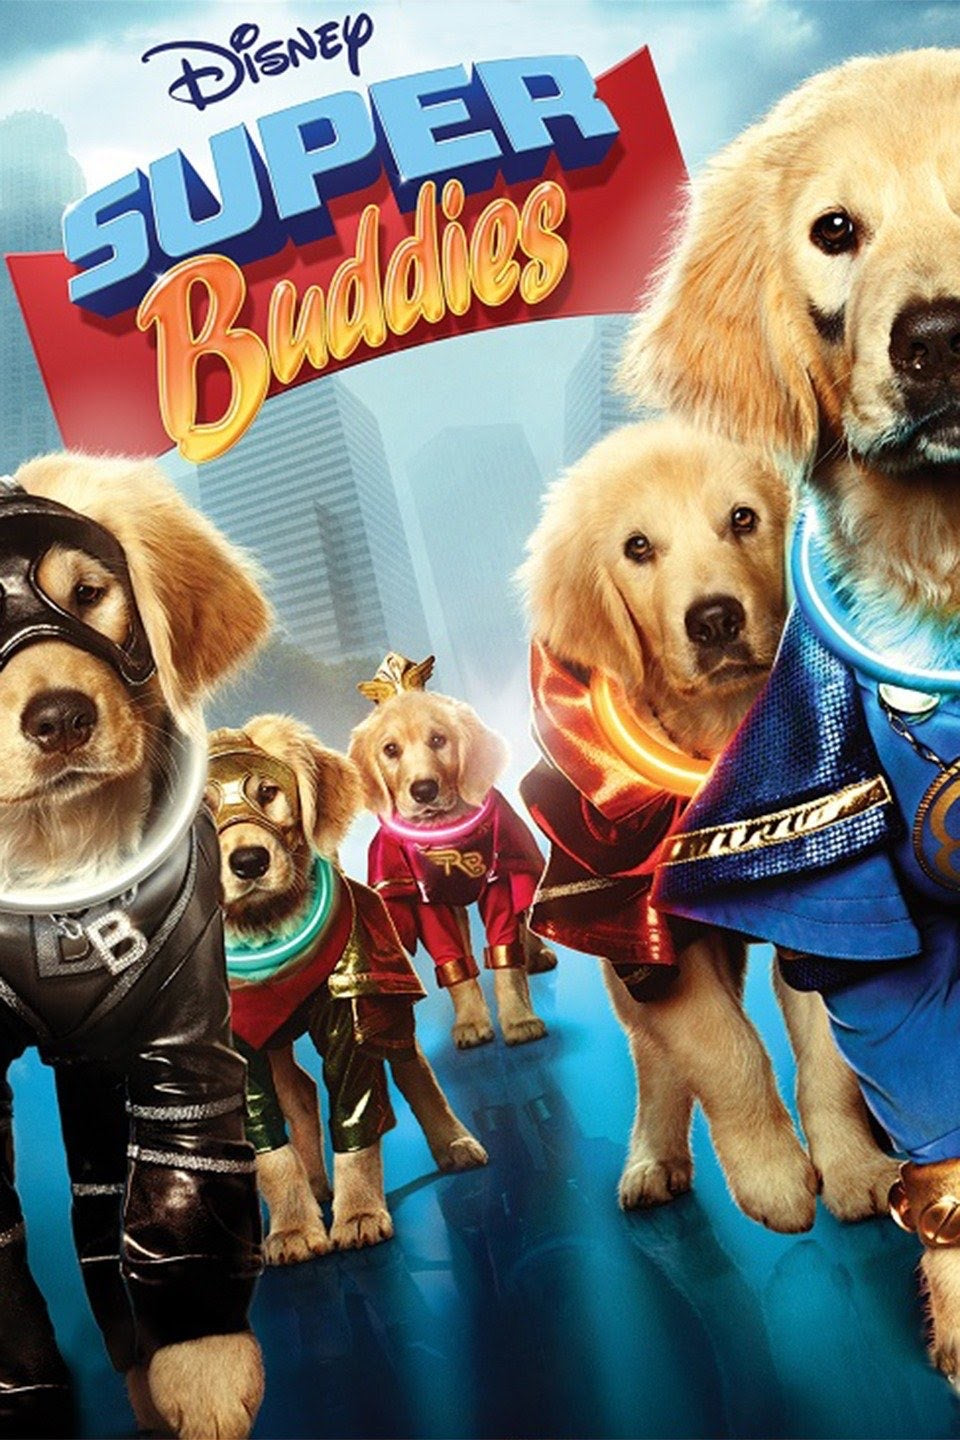 Super Buddies (2013) Vudu or Movies Anywhere HD redemption only